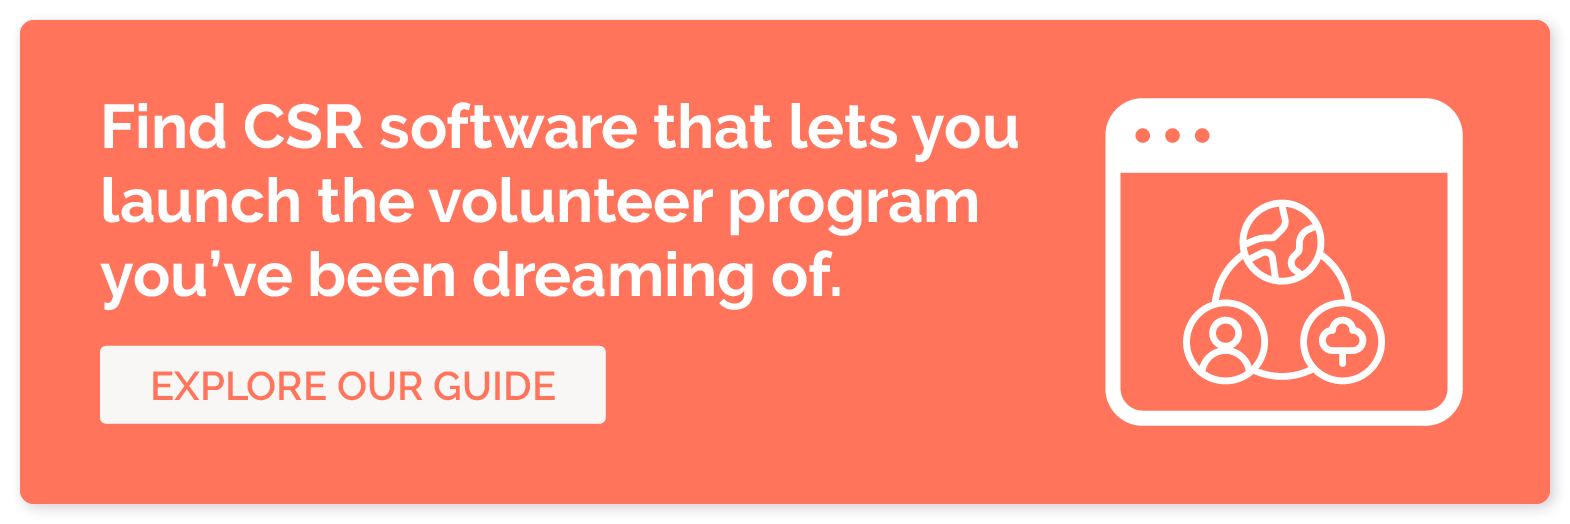 Find CSR software that lets you launch the volunteer program you've been dreaming of. Explore our guide.